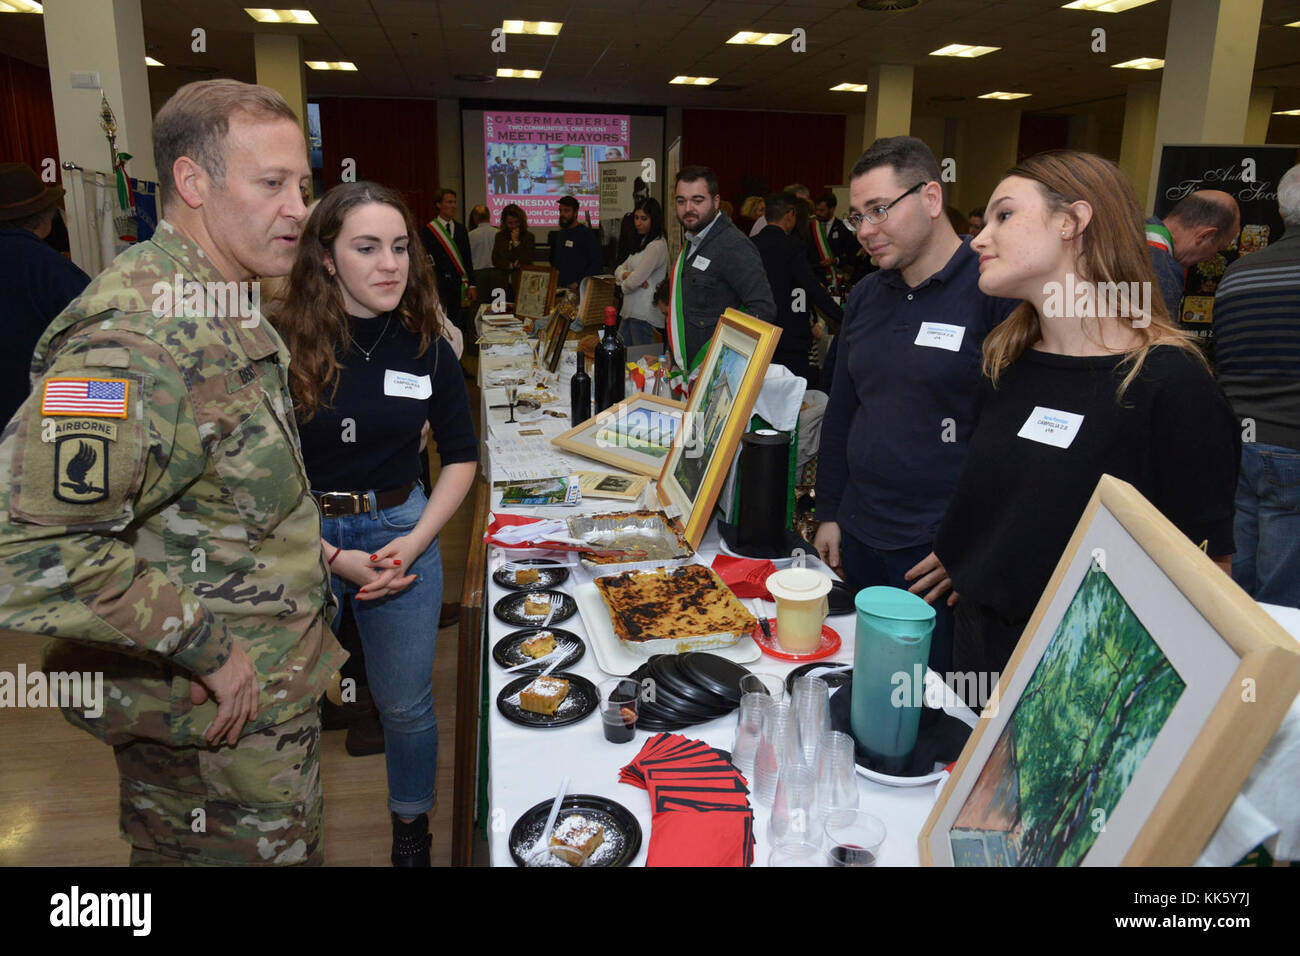 U.S. Col. Eric M. Berdy, U.S. Army Garrison Italy commander, speaks with the members of Campiglia dei Berici community, during the Meet the Mayors event at the Golden Lion Conference Center on Caserma Ederle, Vicenza, Italy, Nov. 8, 2017.   The event is an informal fair that hosts mayors, council members, and cultural and tourism representatives from Italian townships in the Vicenza and Padova provinces. (U.S. Army Photo by Paolo Bovo) Stock Photo